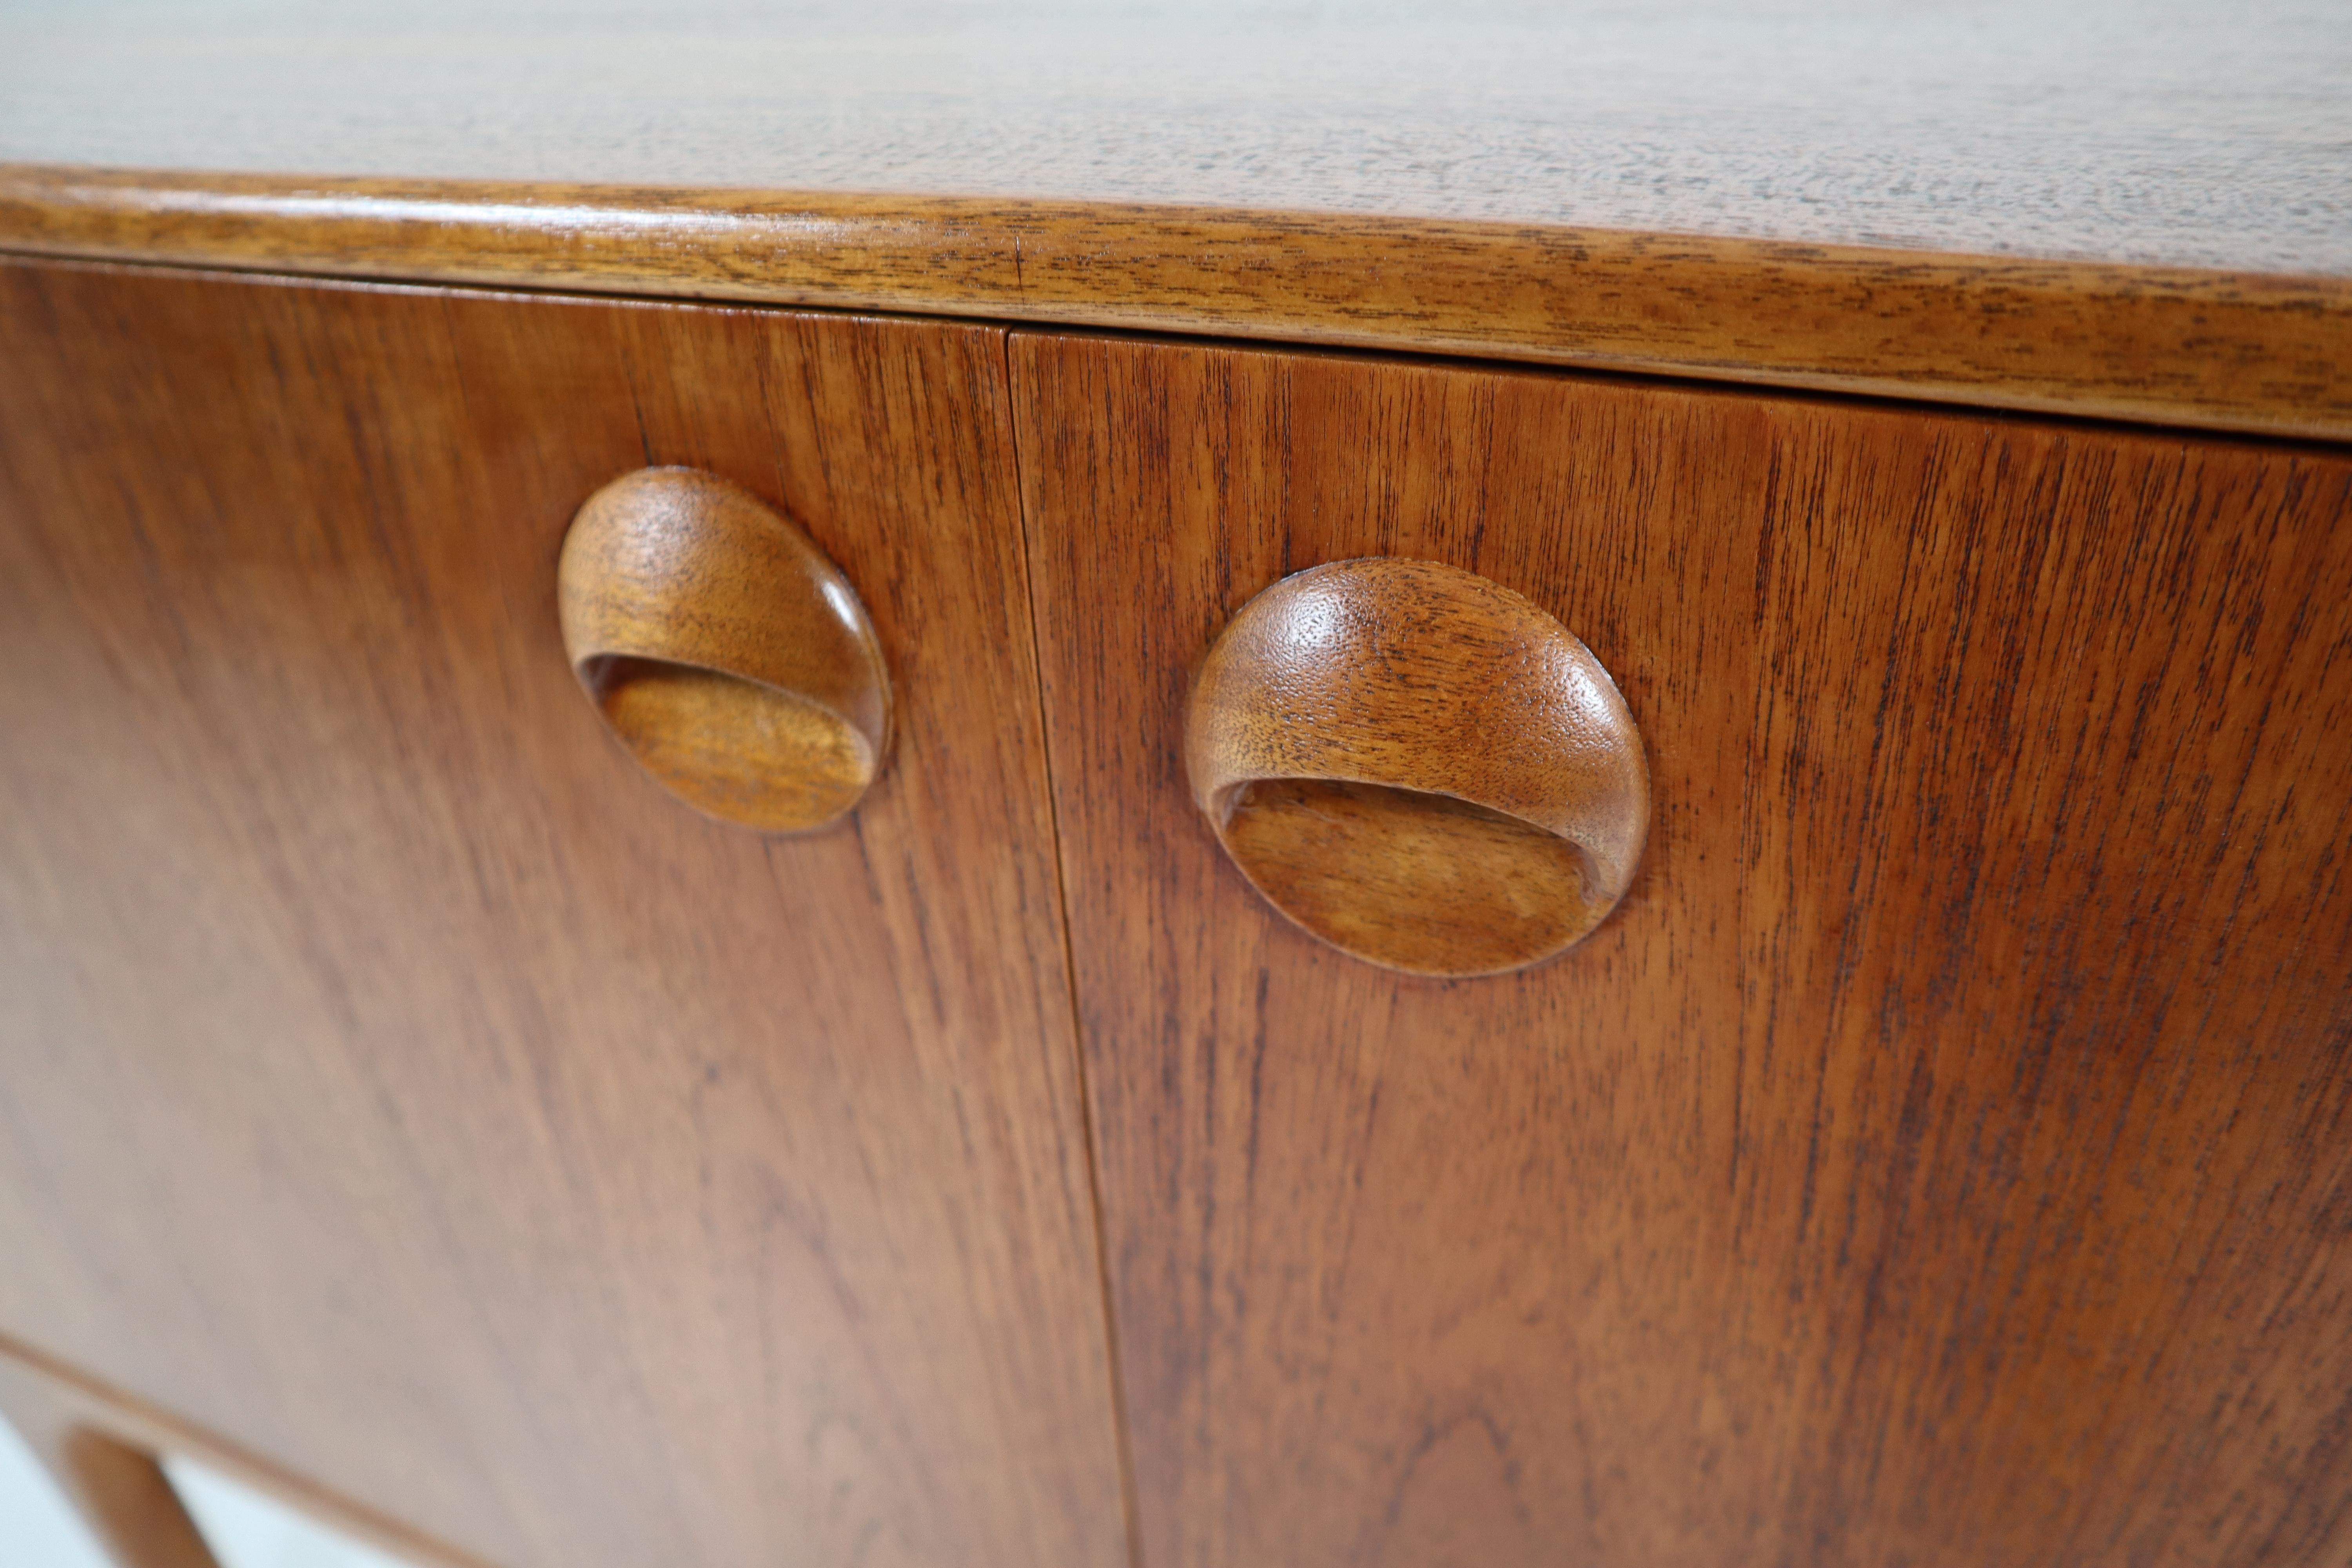 Mid-Century Modern Teak Sideboard Credenza by Tom Robertson for A.H. McIntosh 1